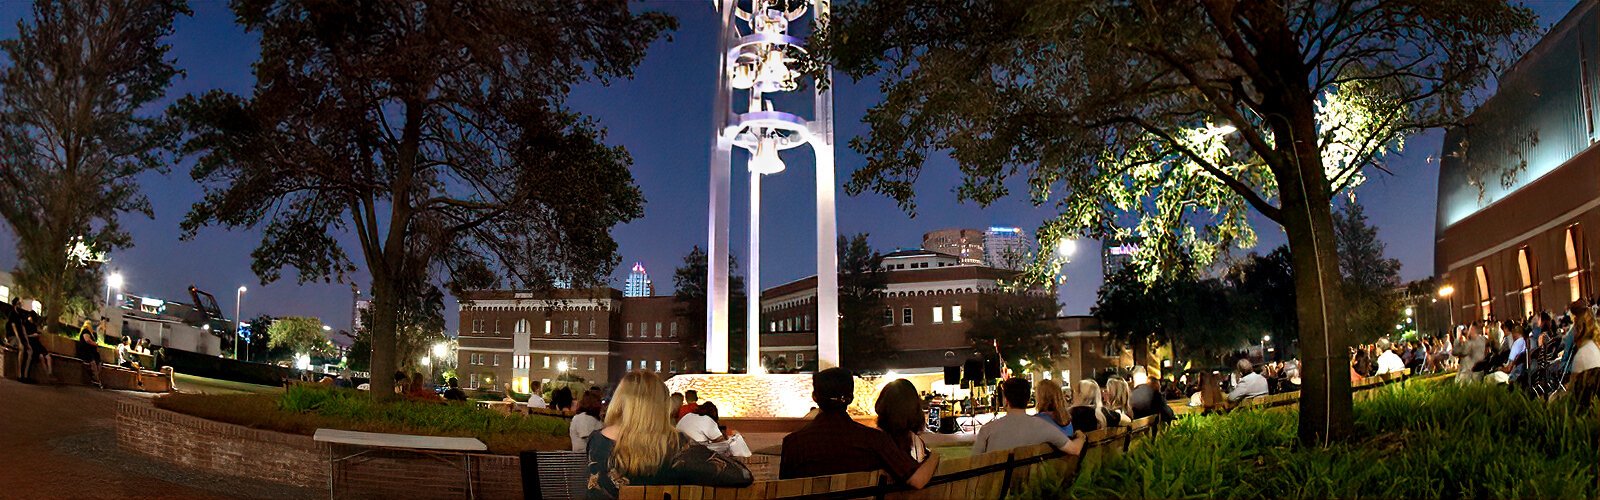 The Ars Sonora is the focal point of Sykes Plaza at UT, which offers the University community a place for inspiration, reflection and entertainment.